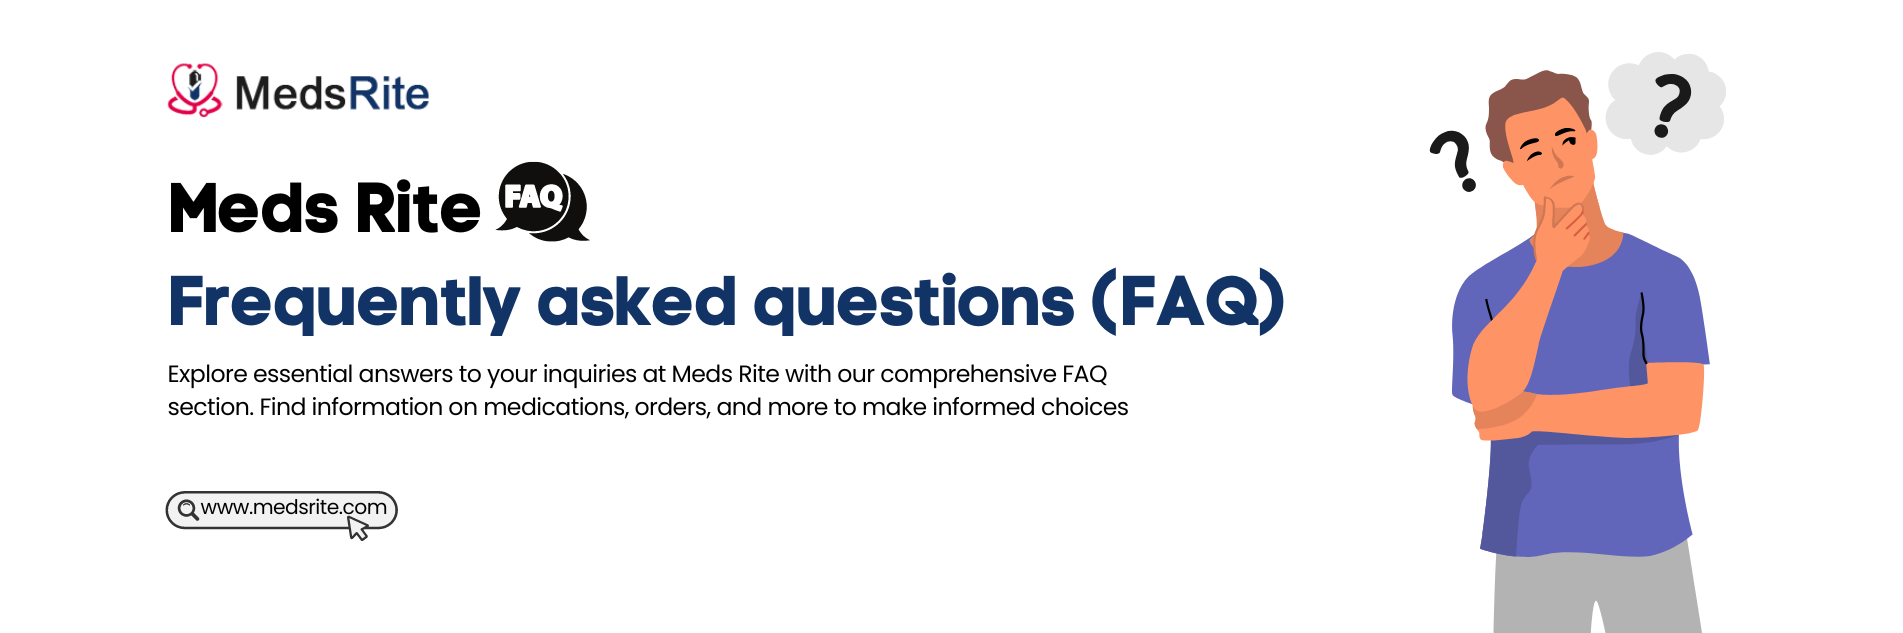 Frequently asked questions (FAQs)